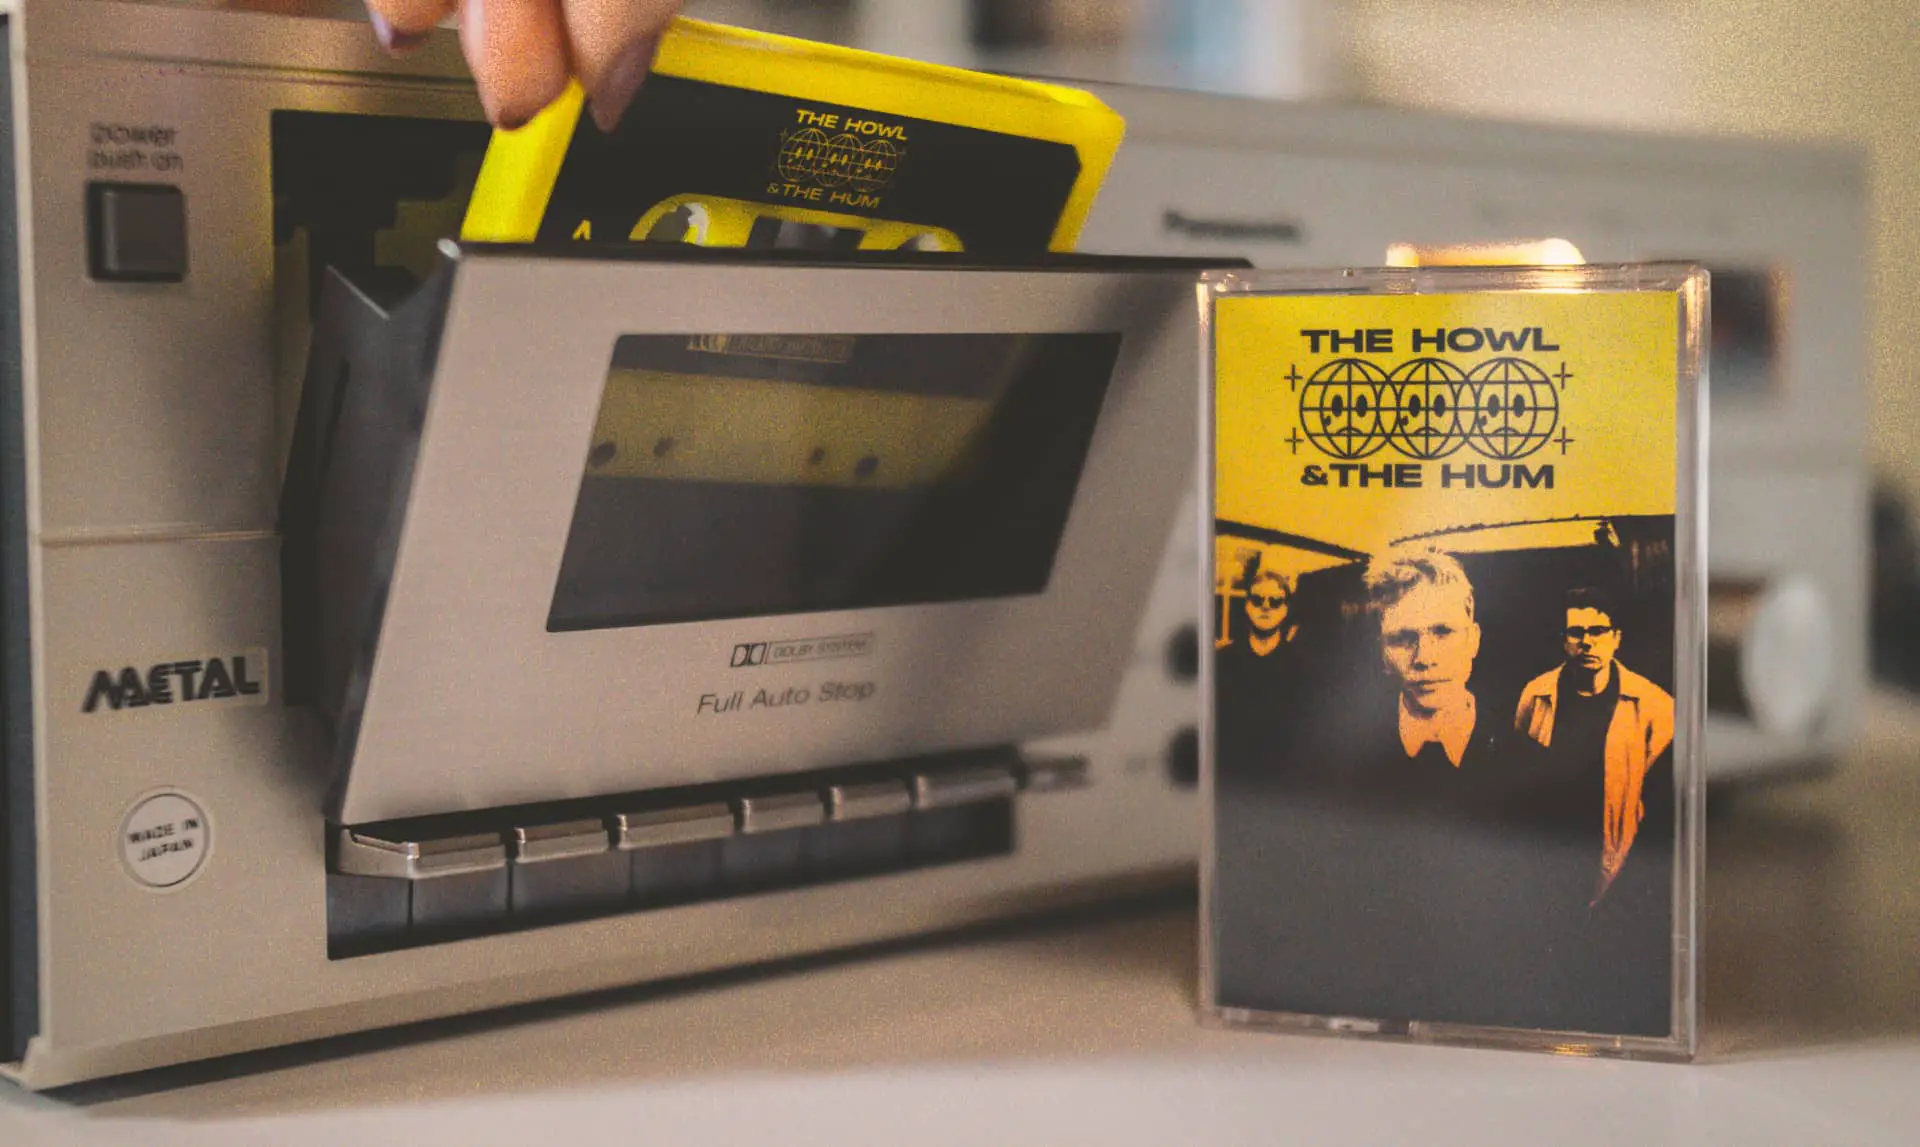 Howl and Hum cassette with tape player